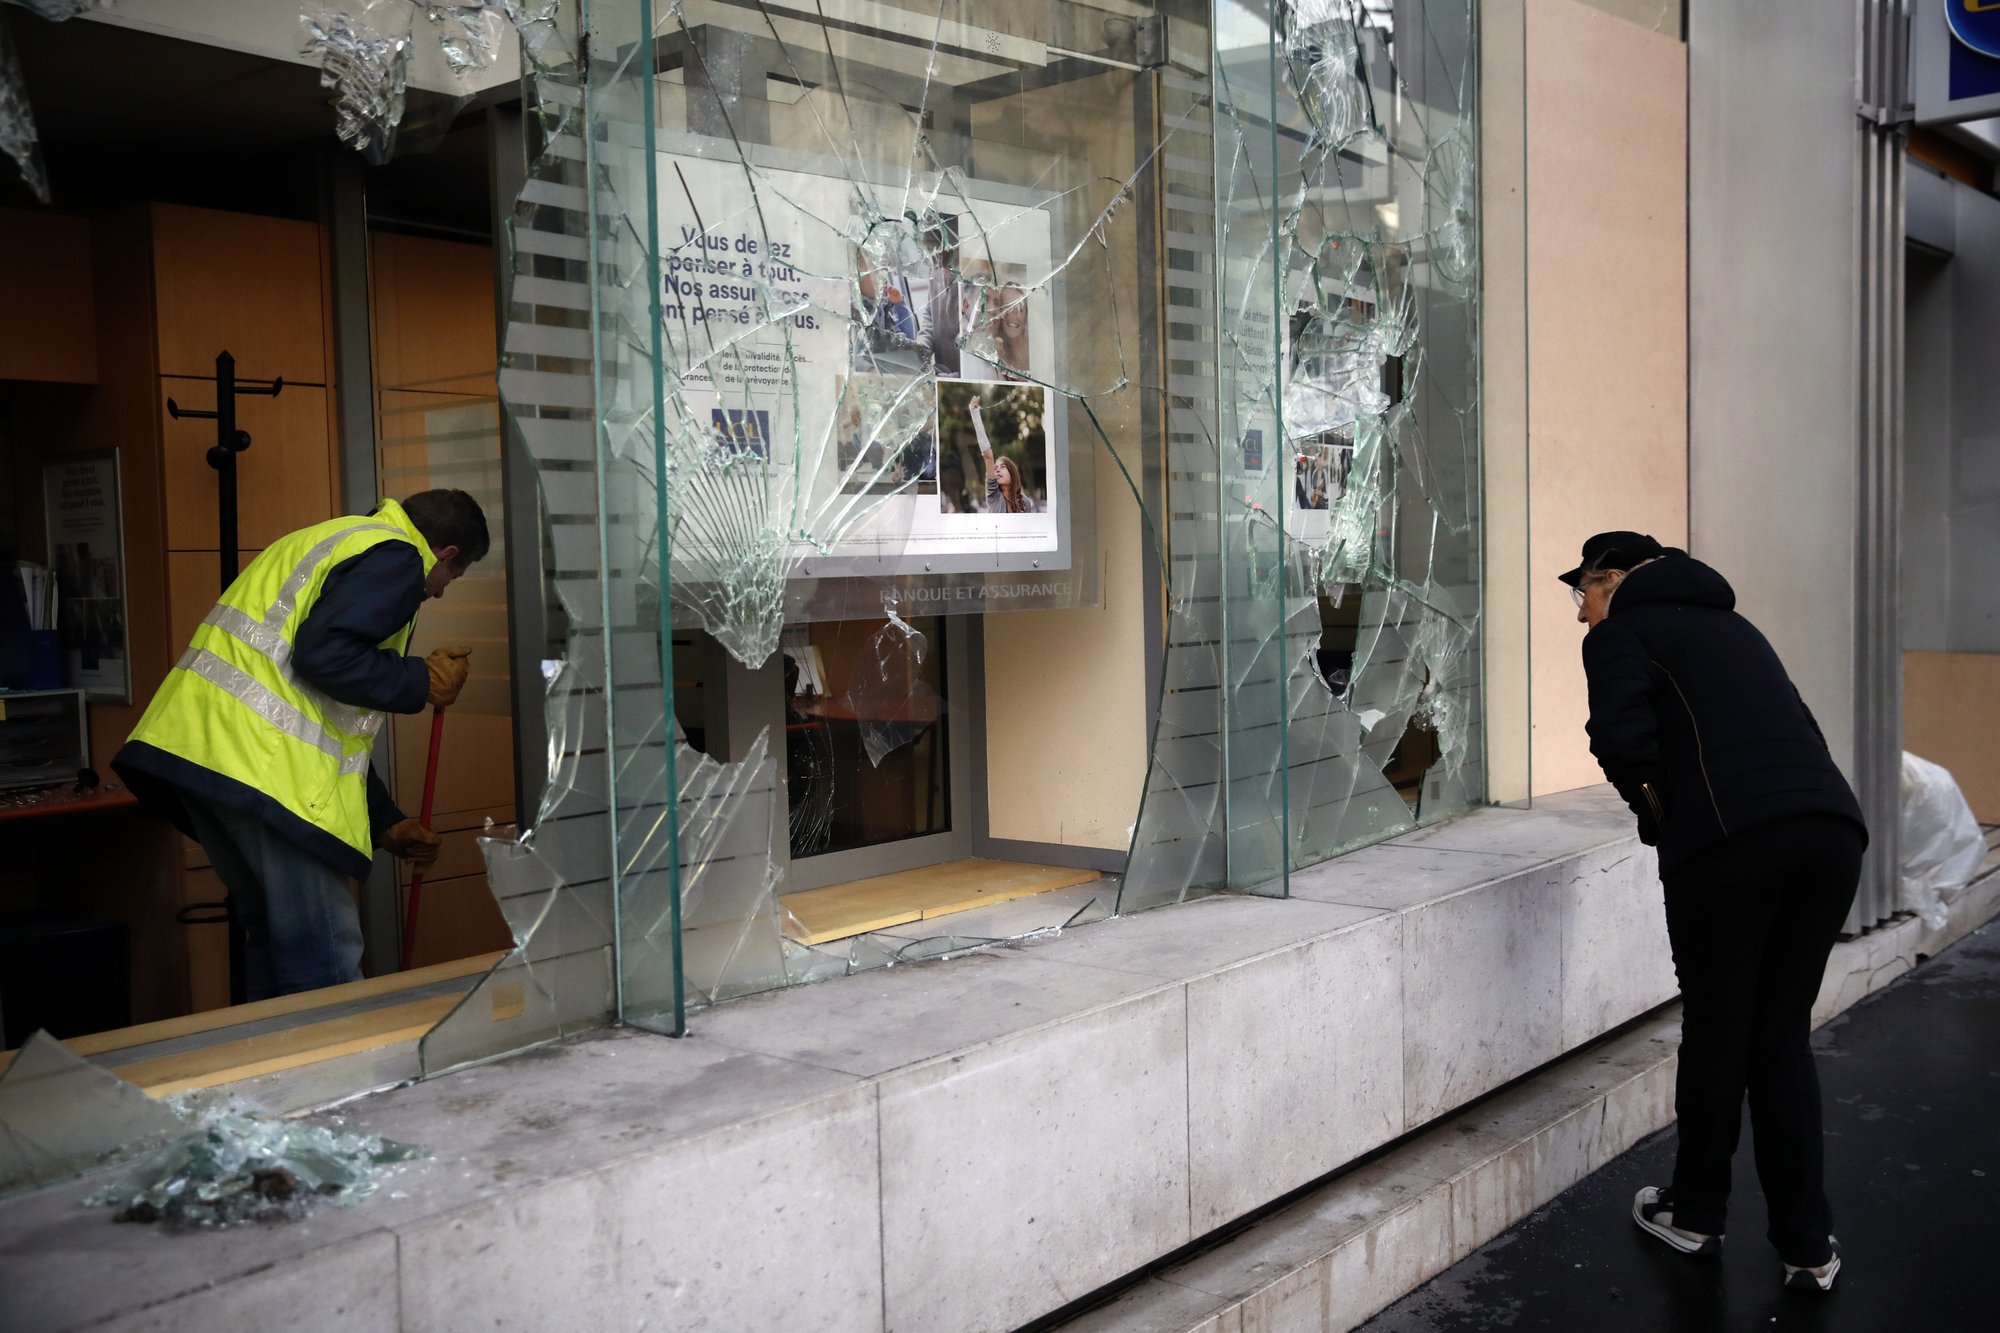 A worker clears debris in a bank as a man watches through smashed windows, in Paris, on Sunday, Dec. 9, 2018. Photo: AP